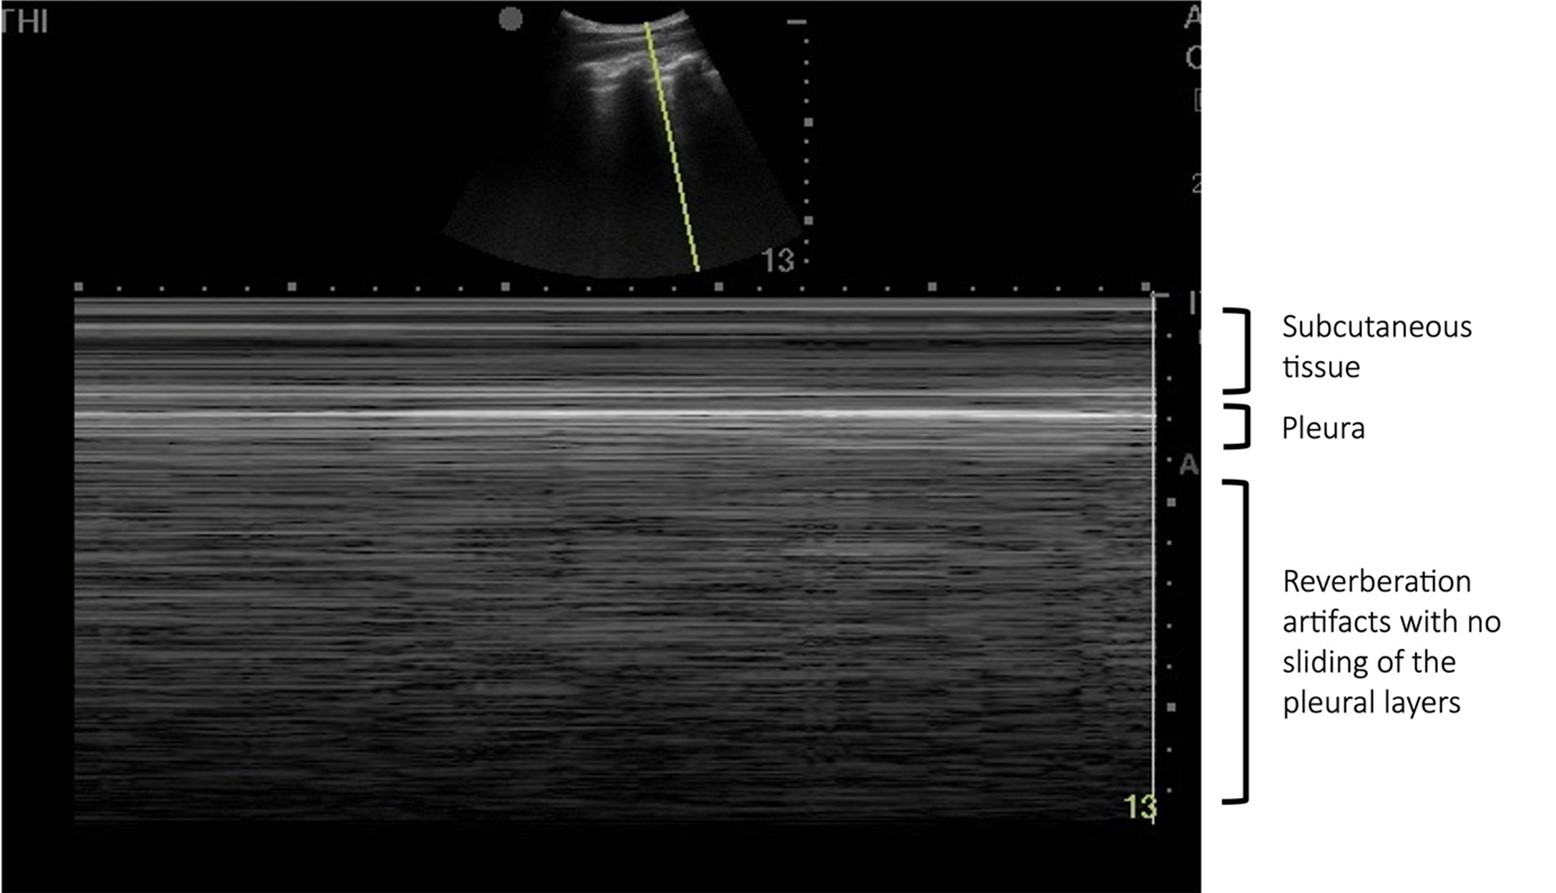 Figure 1 - Ultrasound of the left thorax in M-mode showing the barcode/stratosphere sign